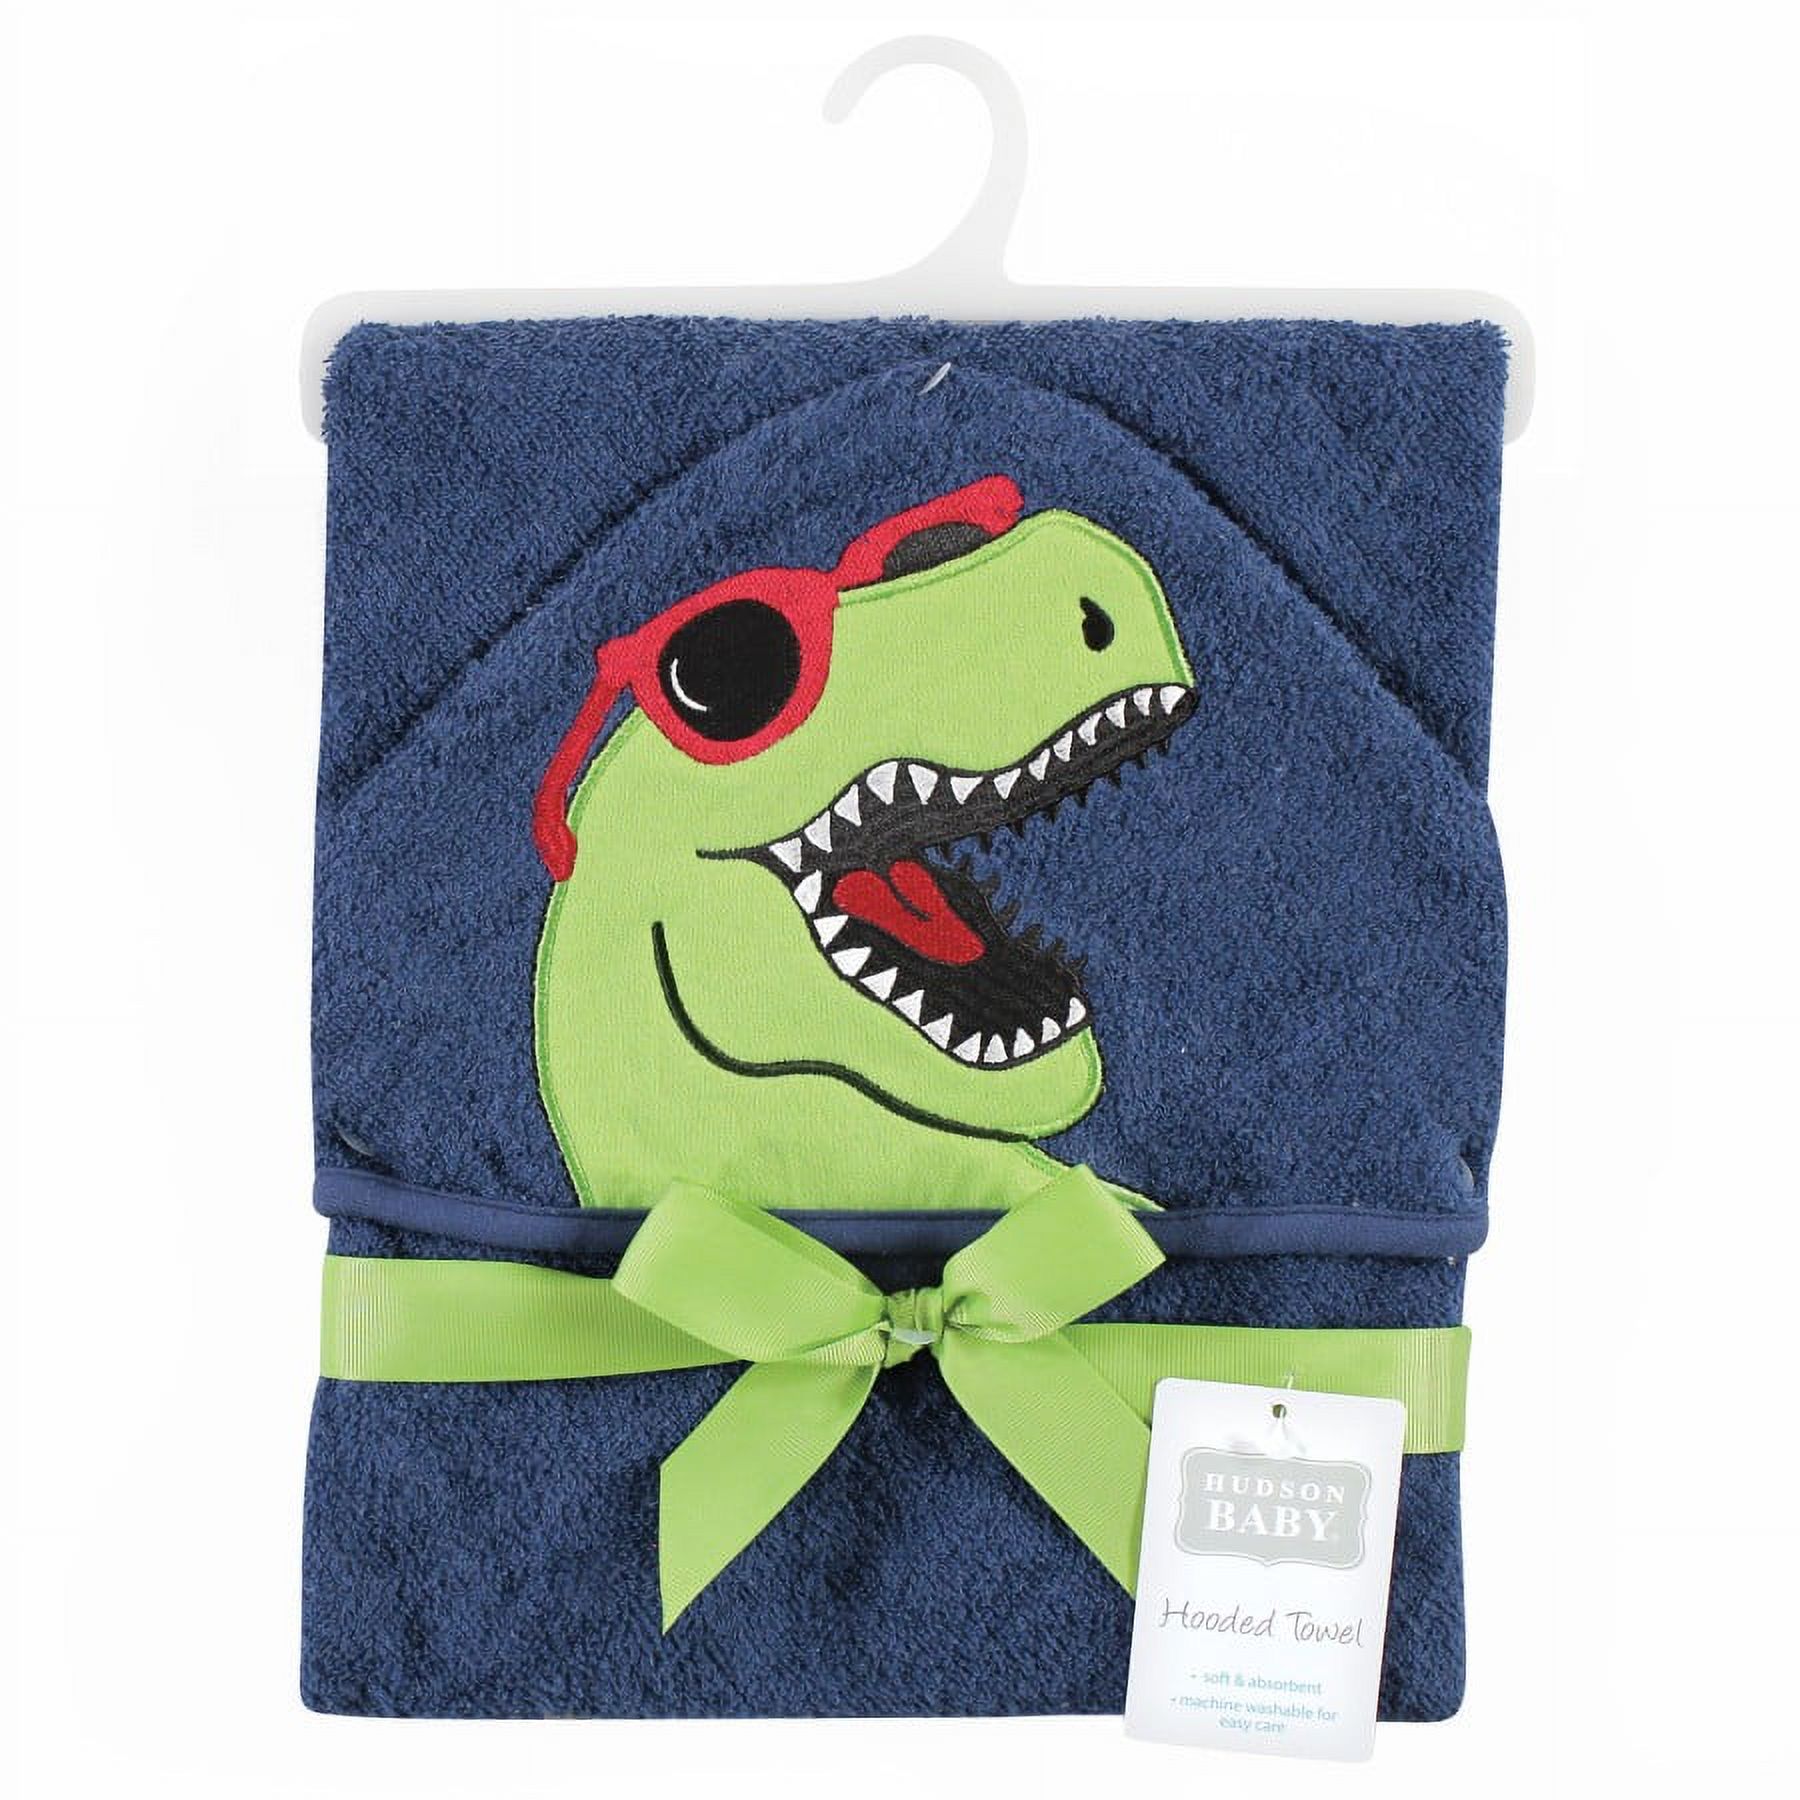 Hudson Baby Infant Boy Cotton Animal Face Hooded Towel, Cool Dino, One Size - image 2 of 2